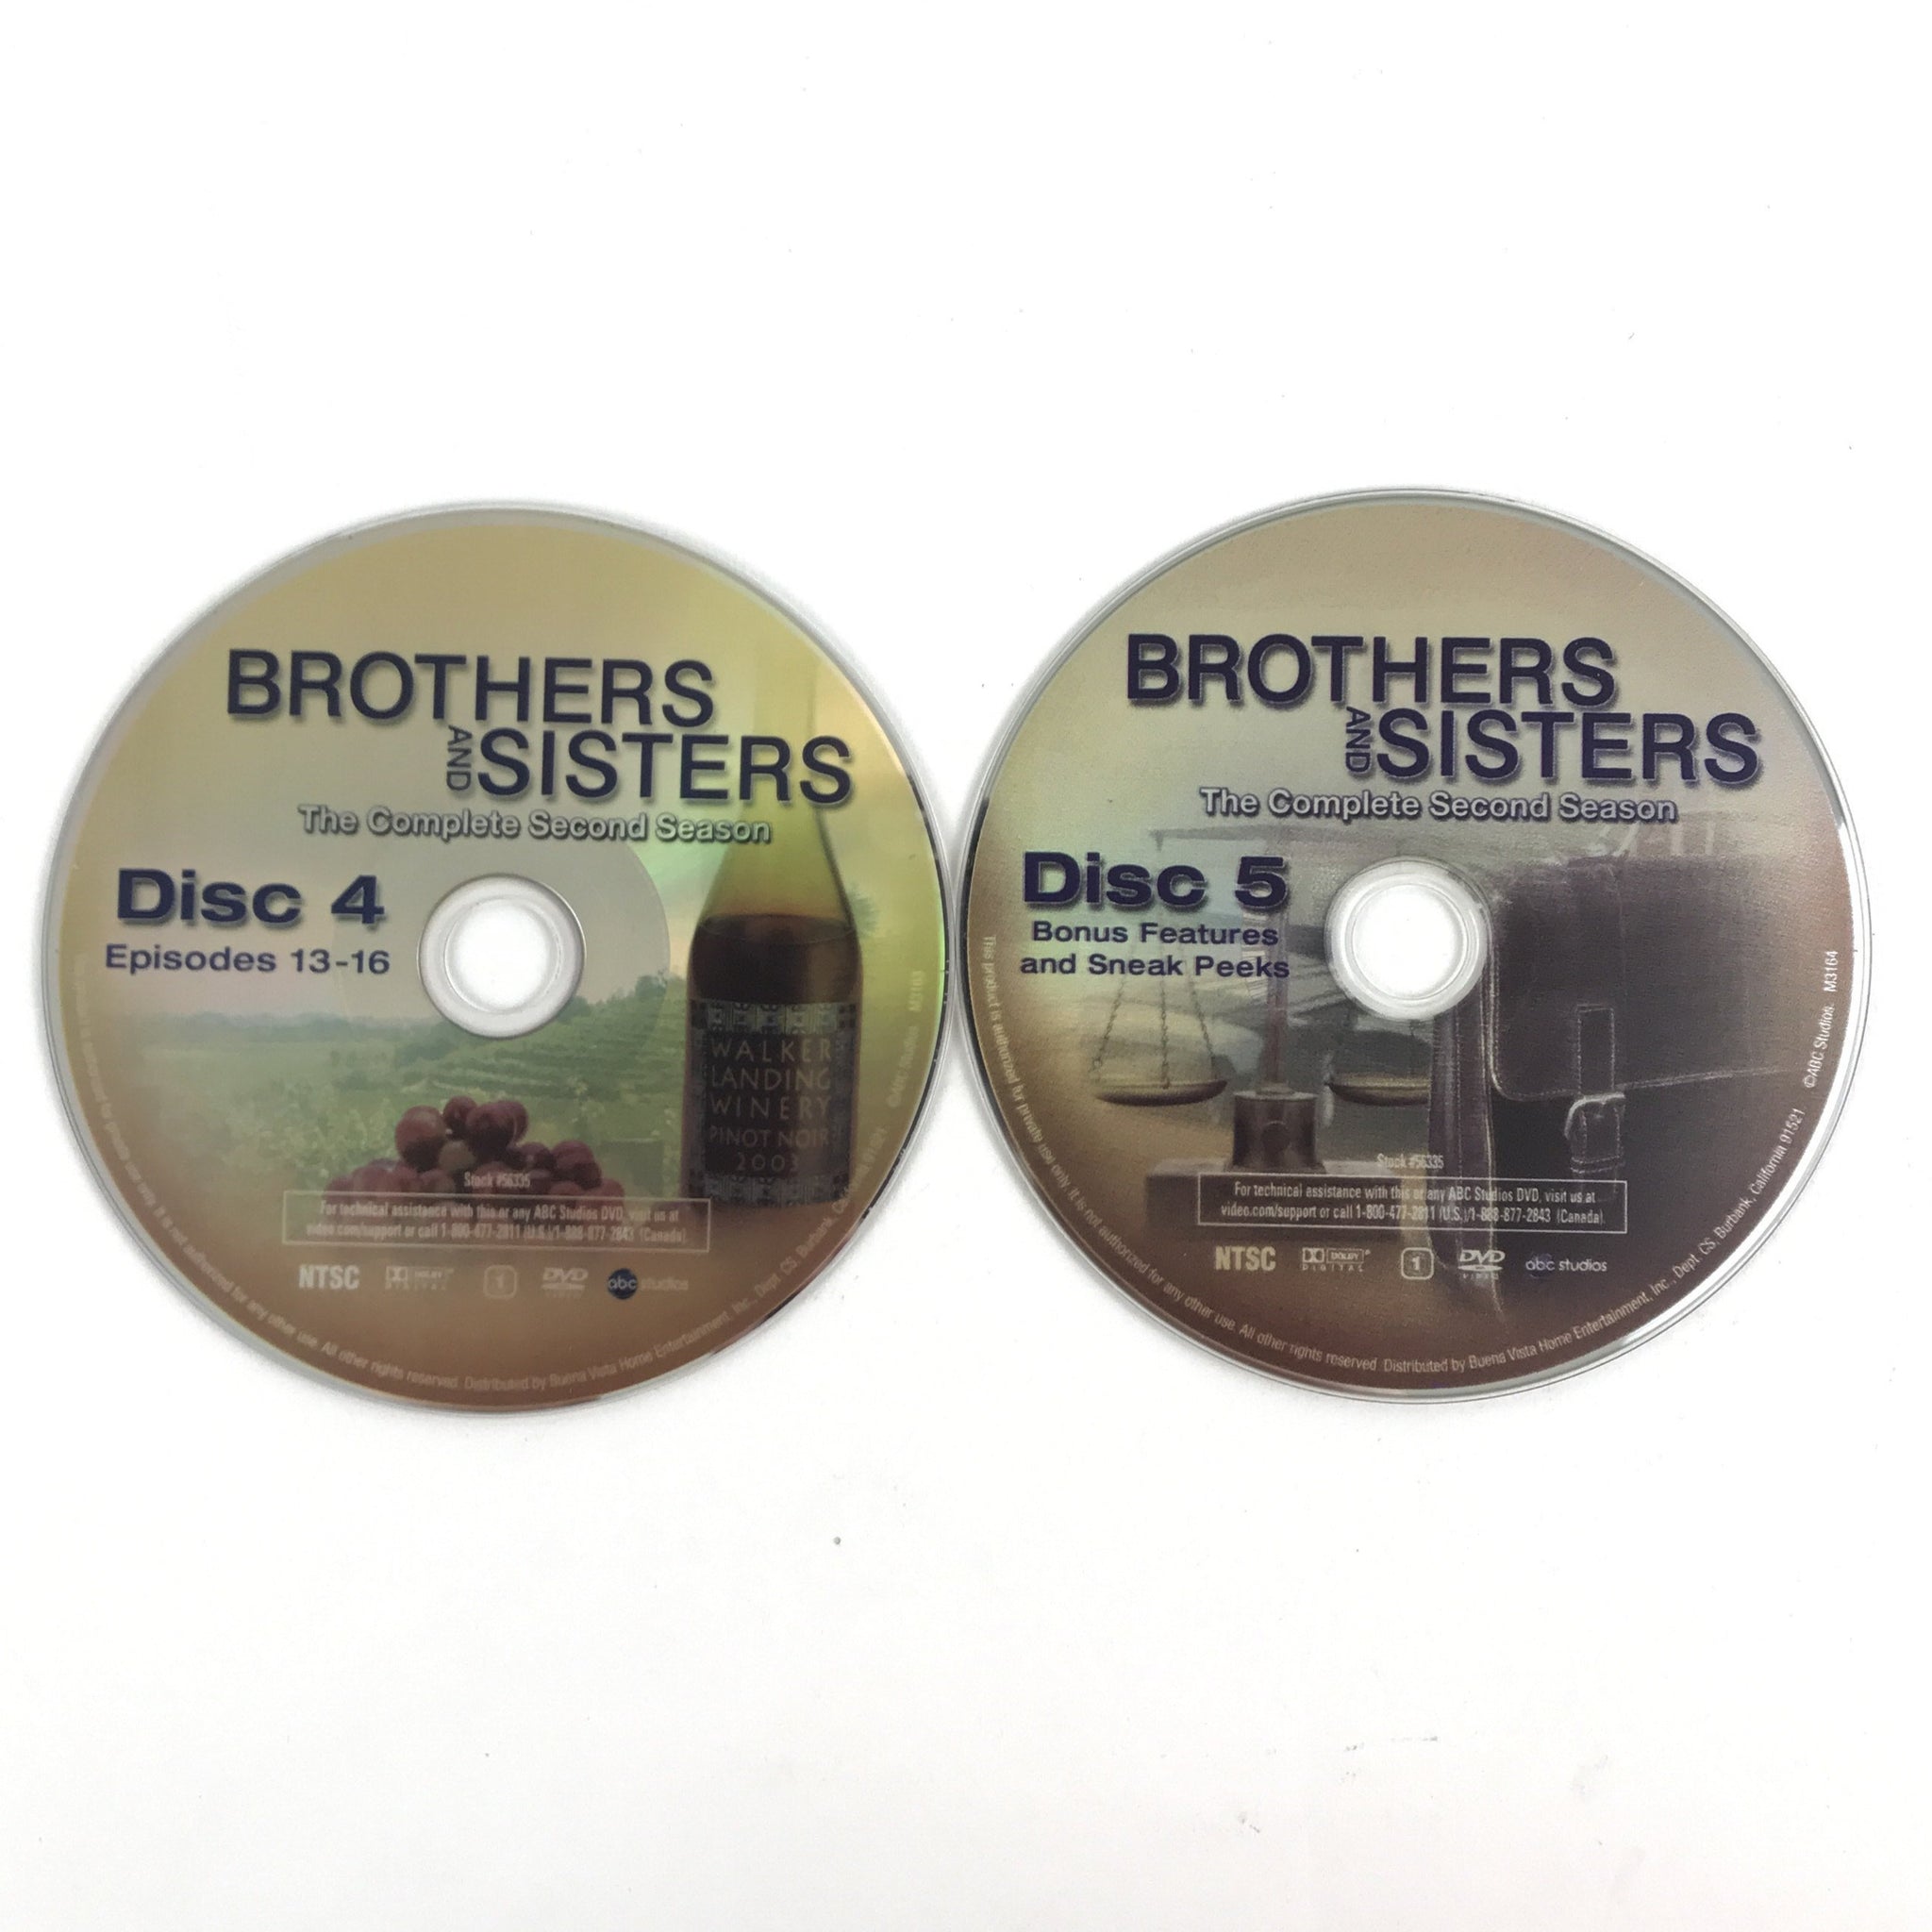 Brothers And Sisters Season 2 - Episodes 13-16 + Bonus (DVDs) - DISCS 4 & 5 ONLY